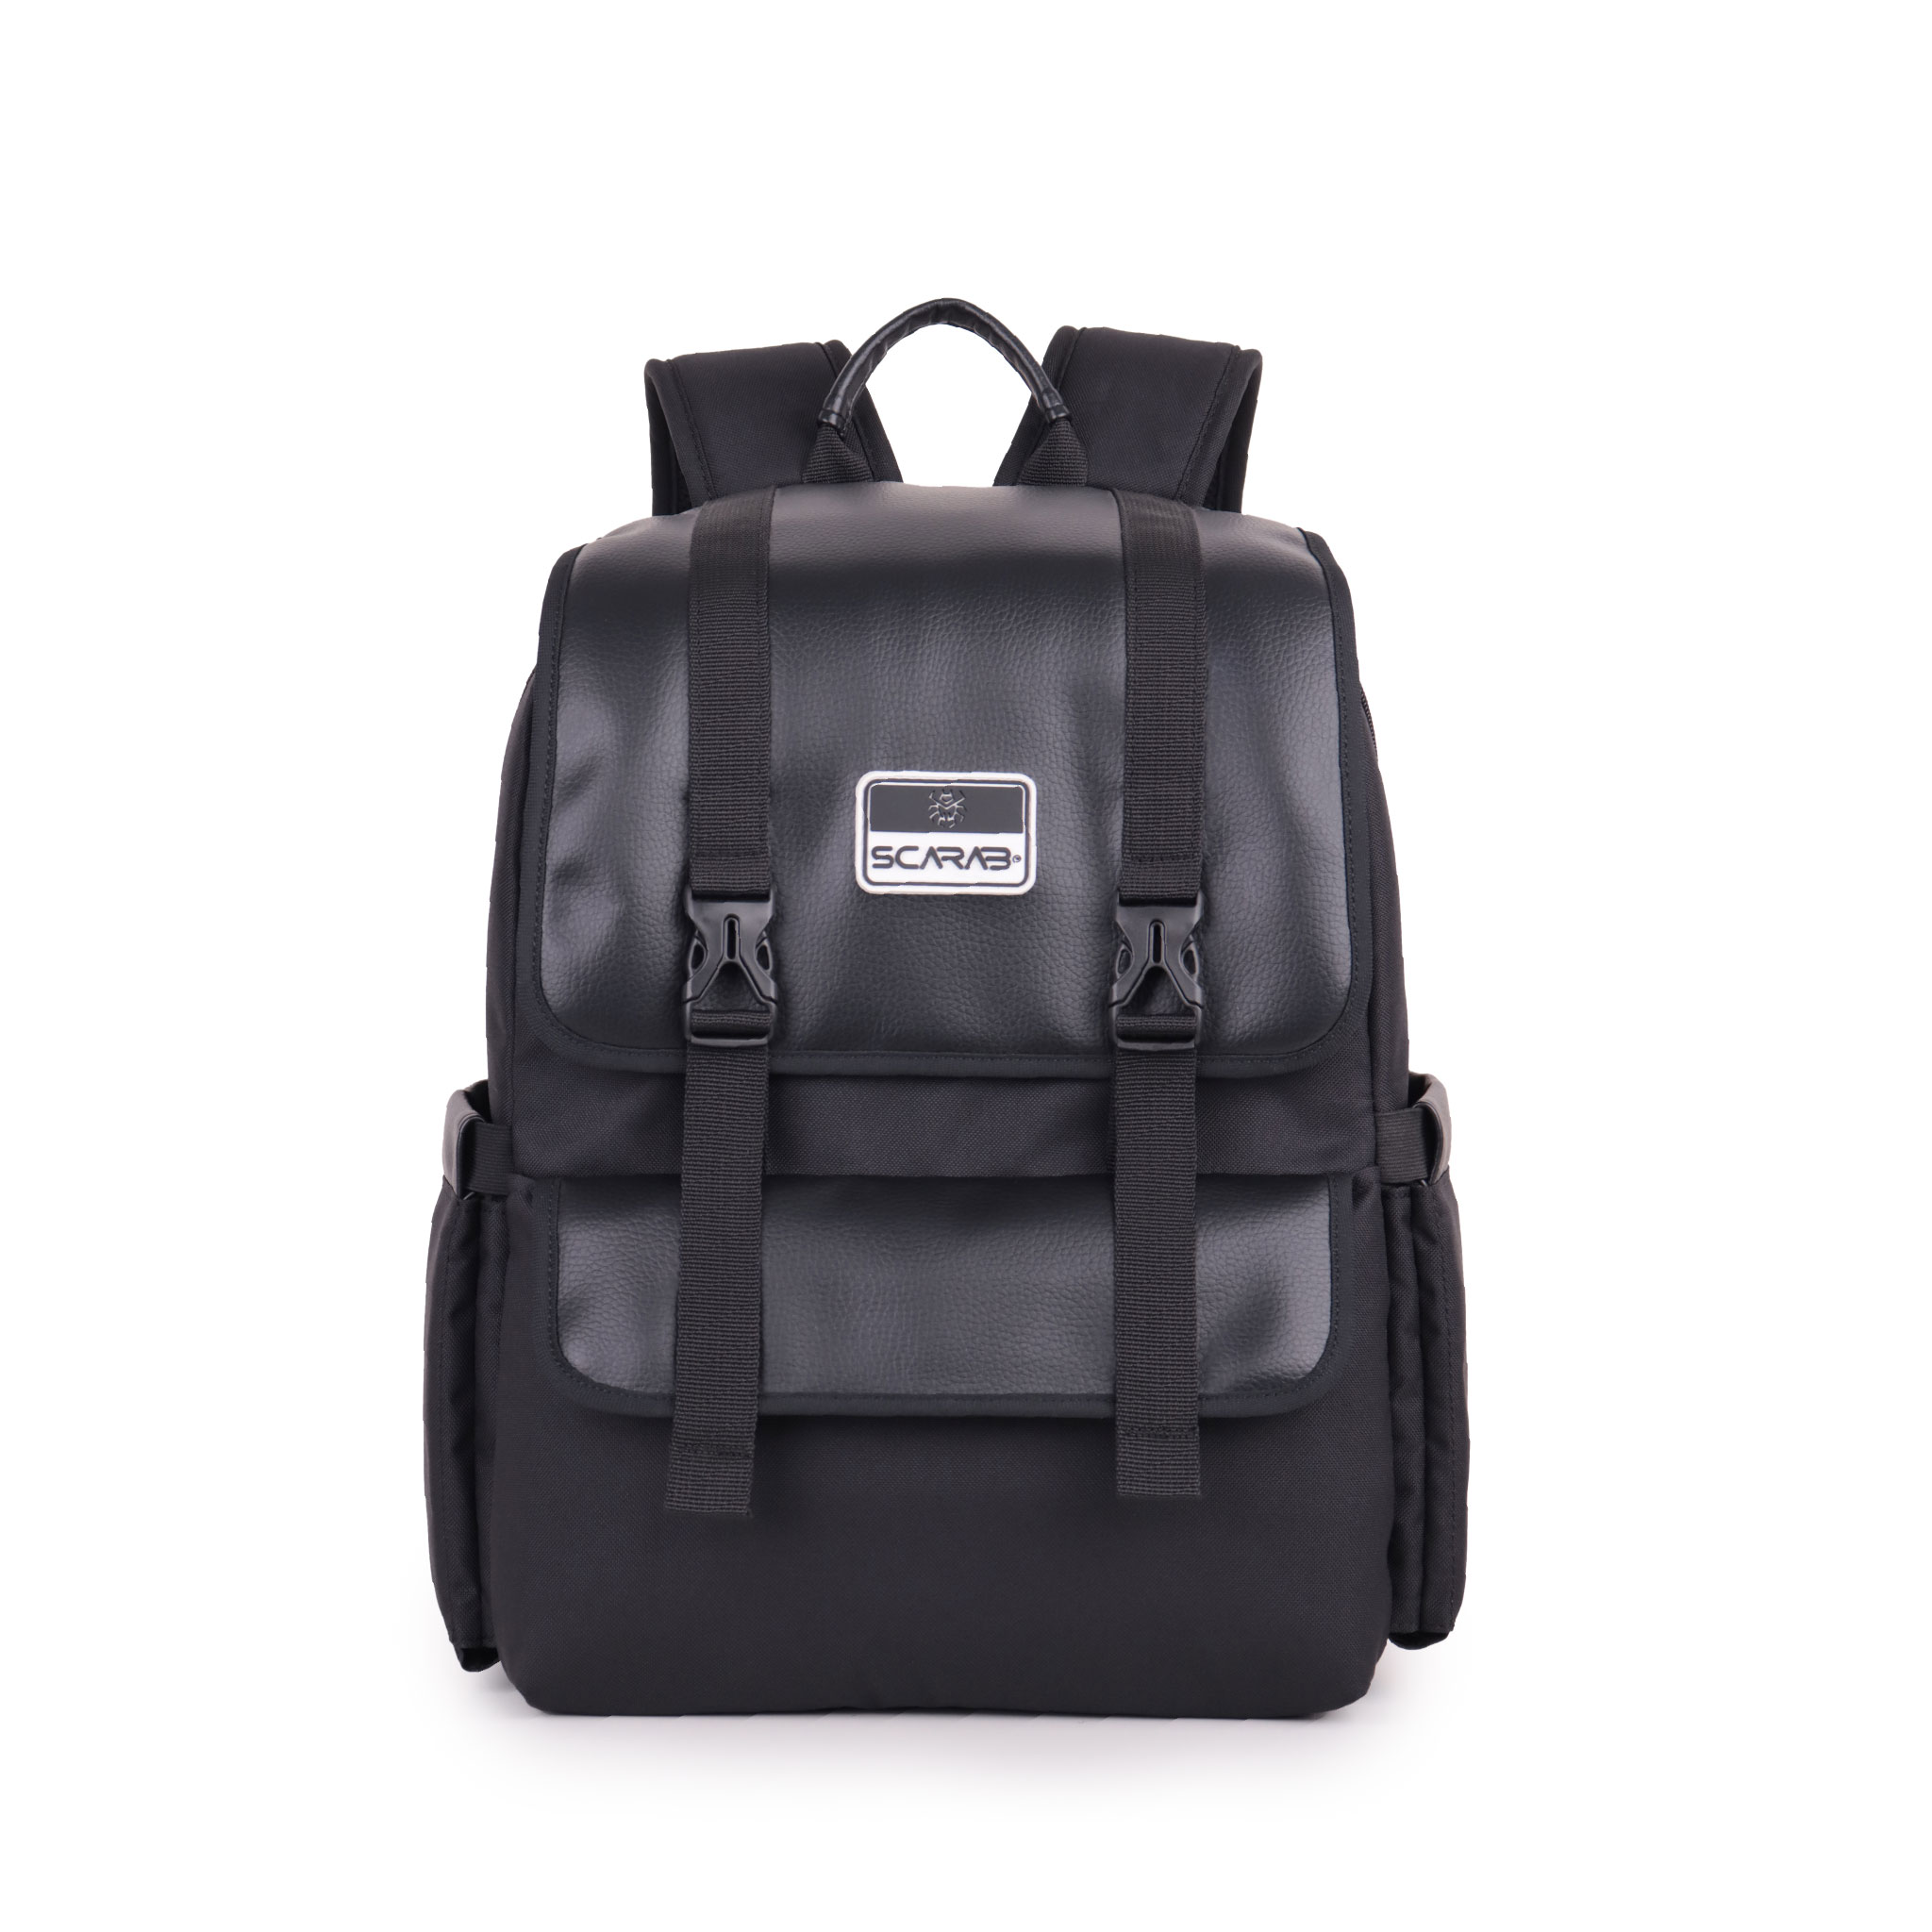 Balo nam nữ Scarab Passion Backpack có ngăn chống sốc laptop 15.6 inch